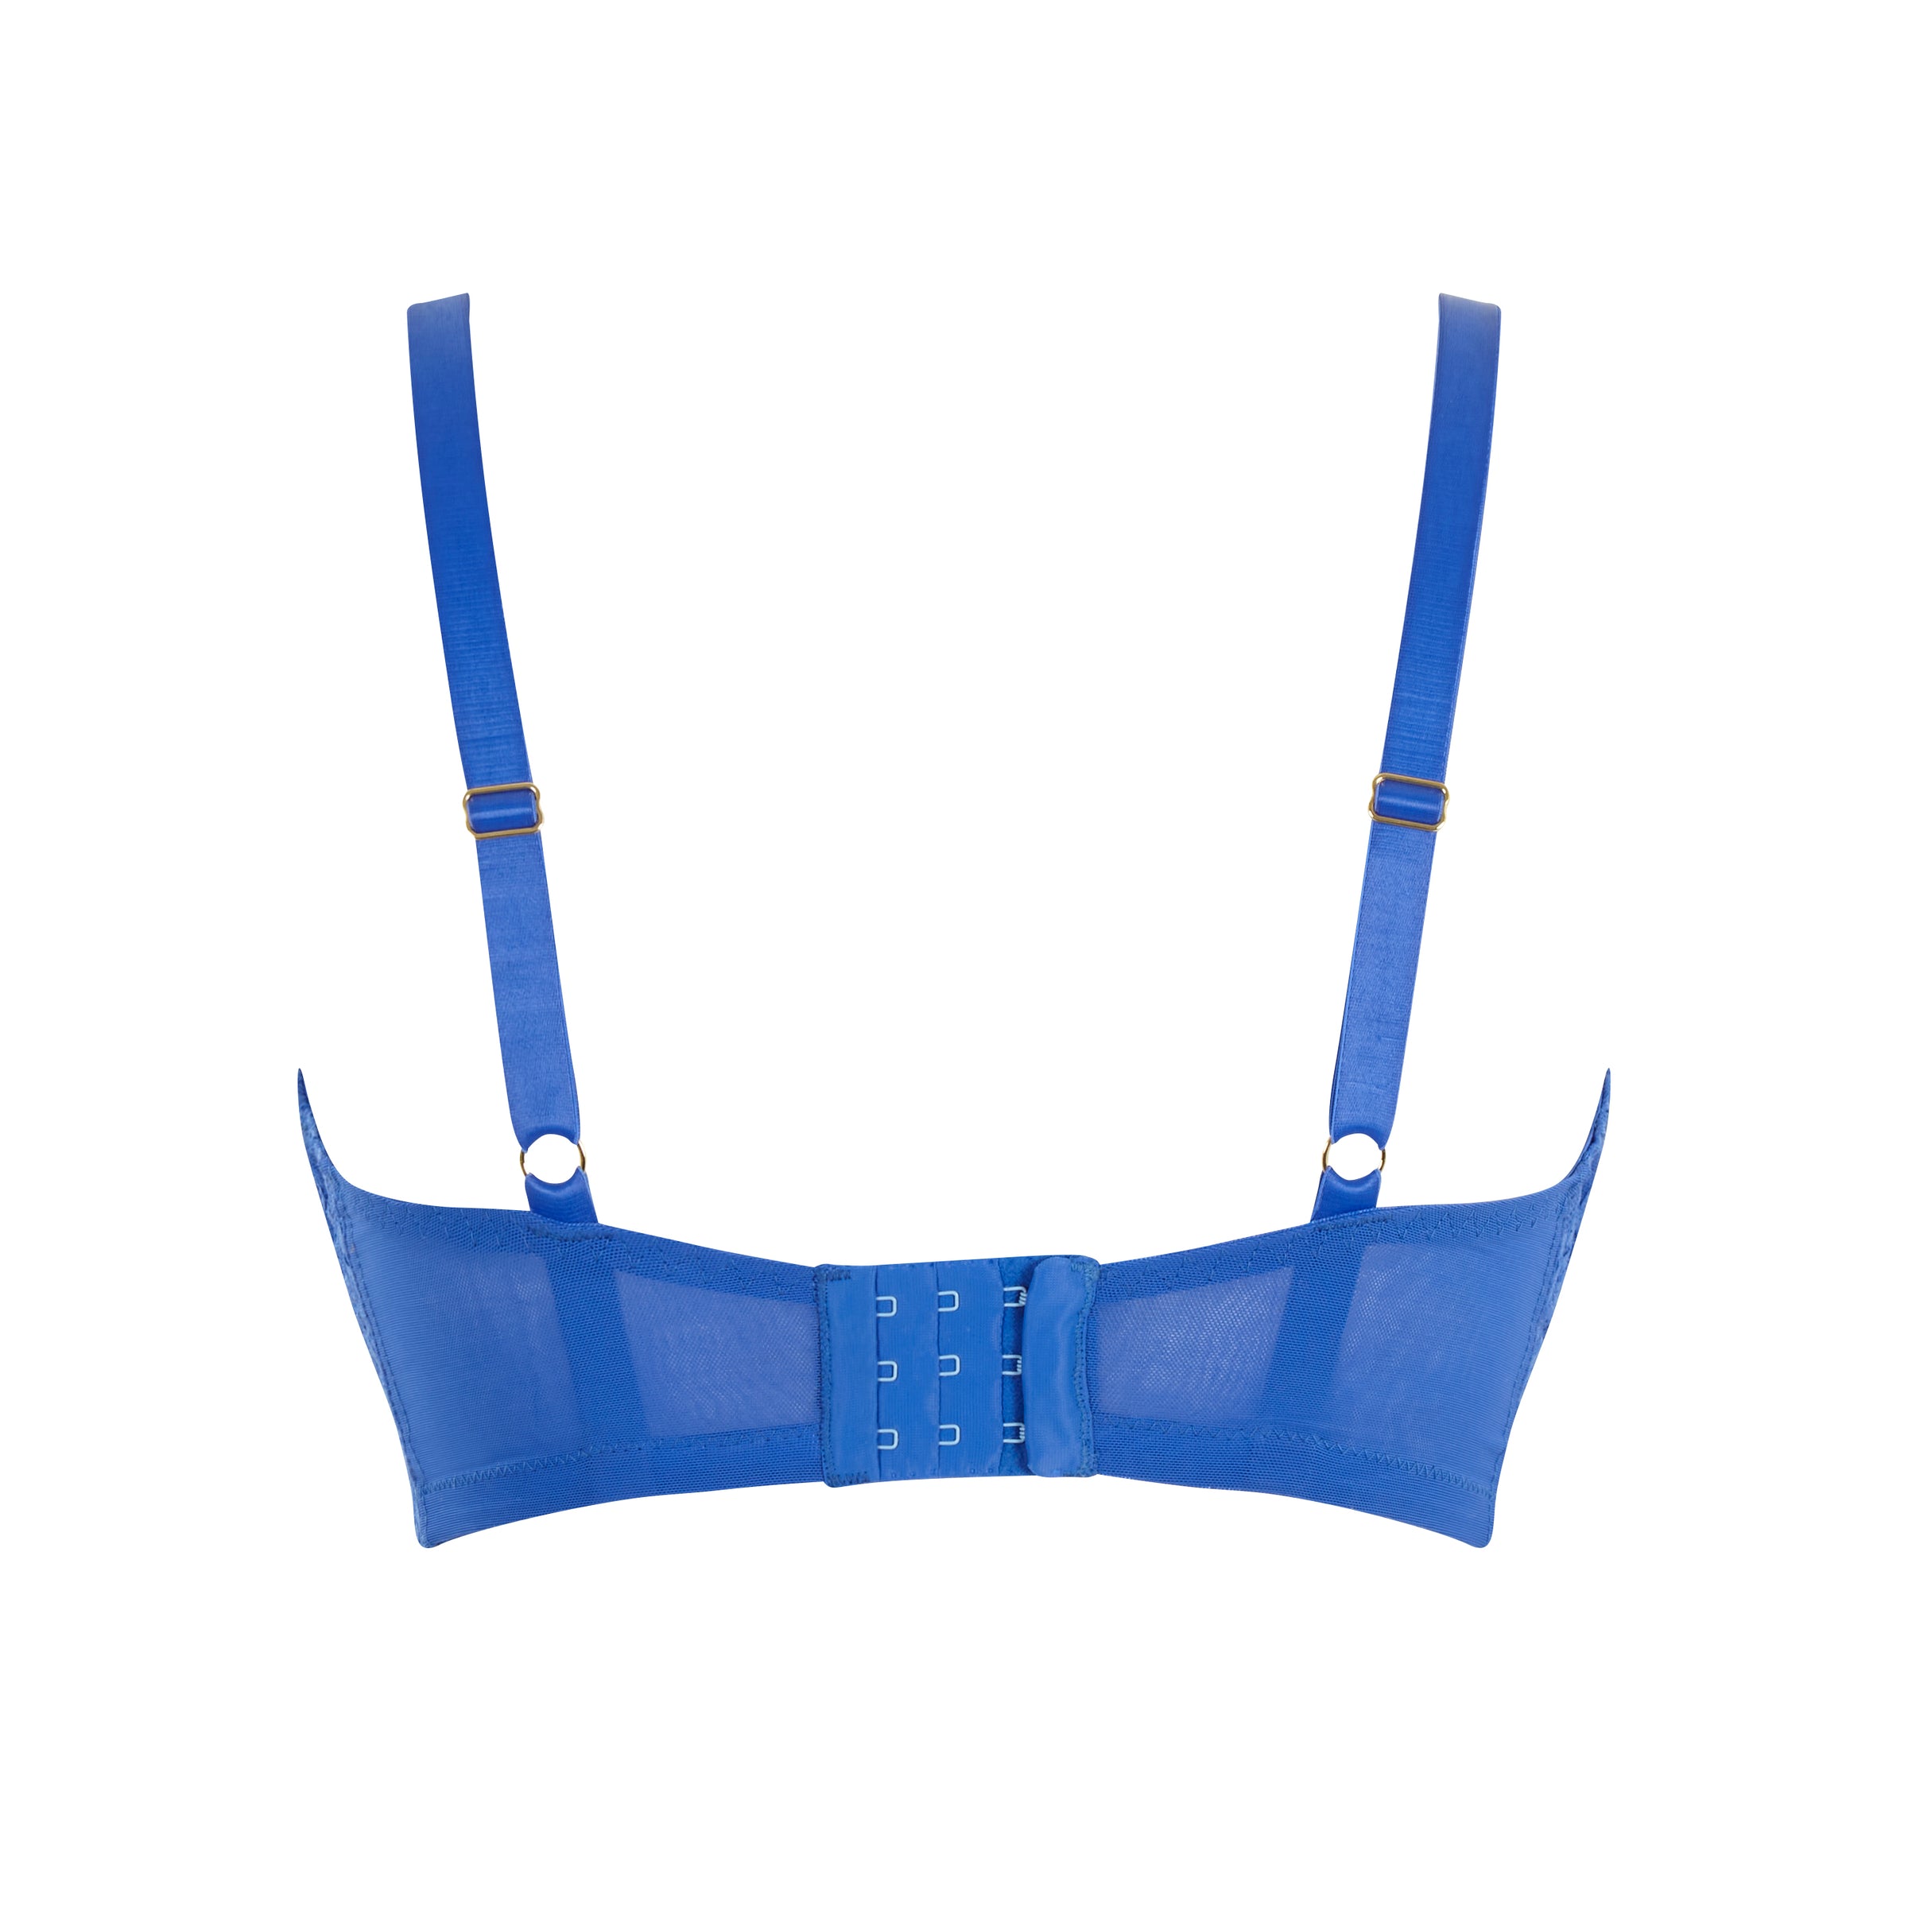 George - - G3ORGE BLUE Non-Padded Full Cup Embroidered Bra - Size 36 (G cup)